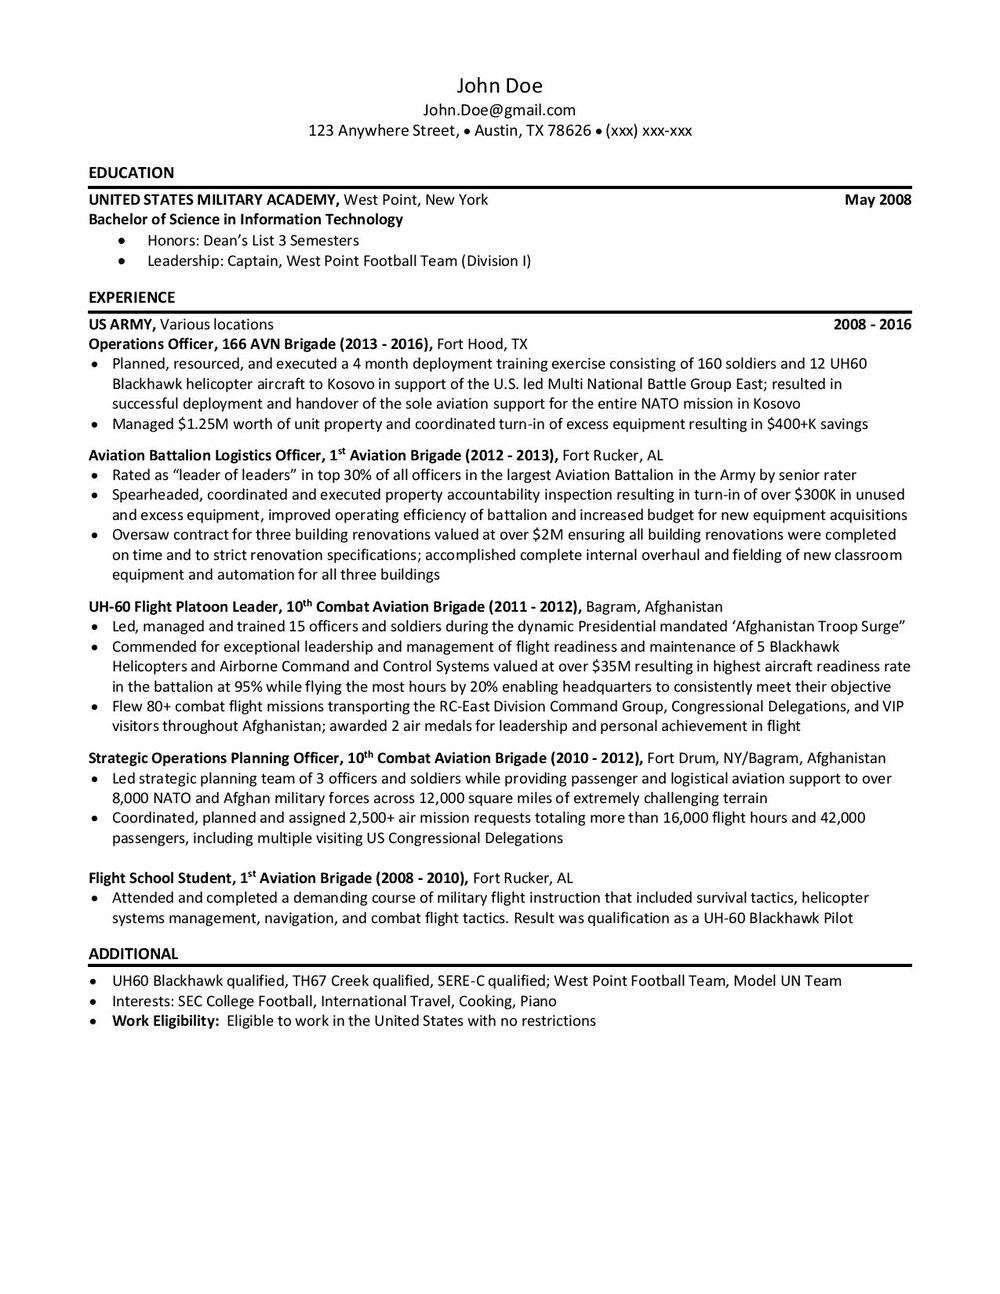 Sample High School Resume for Military Academy Military to Civilian Resume Guide â Post Military Career Options